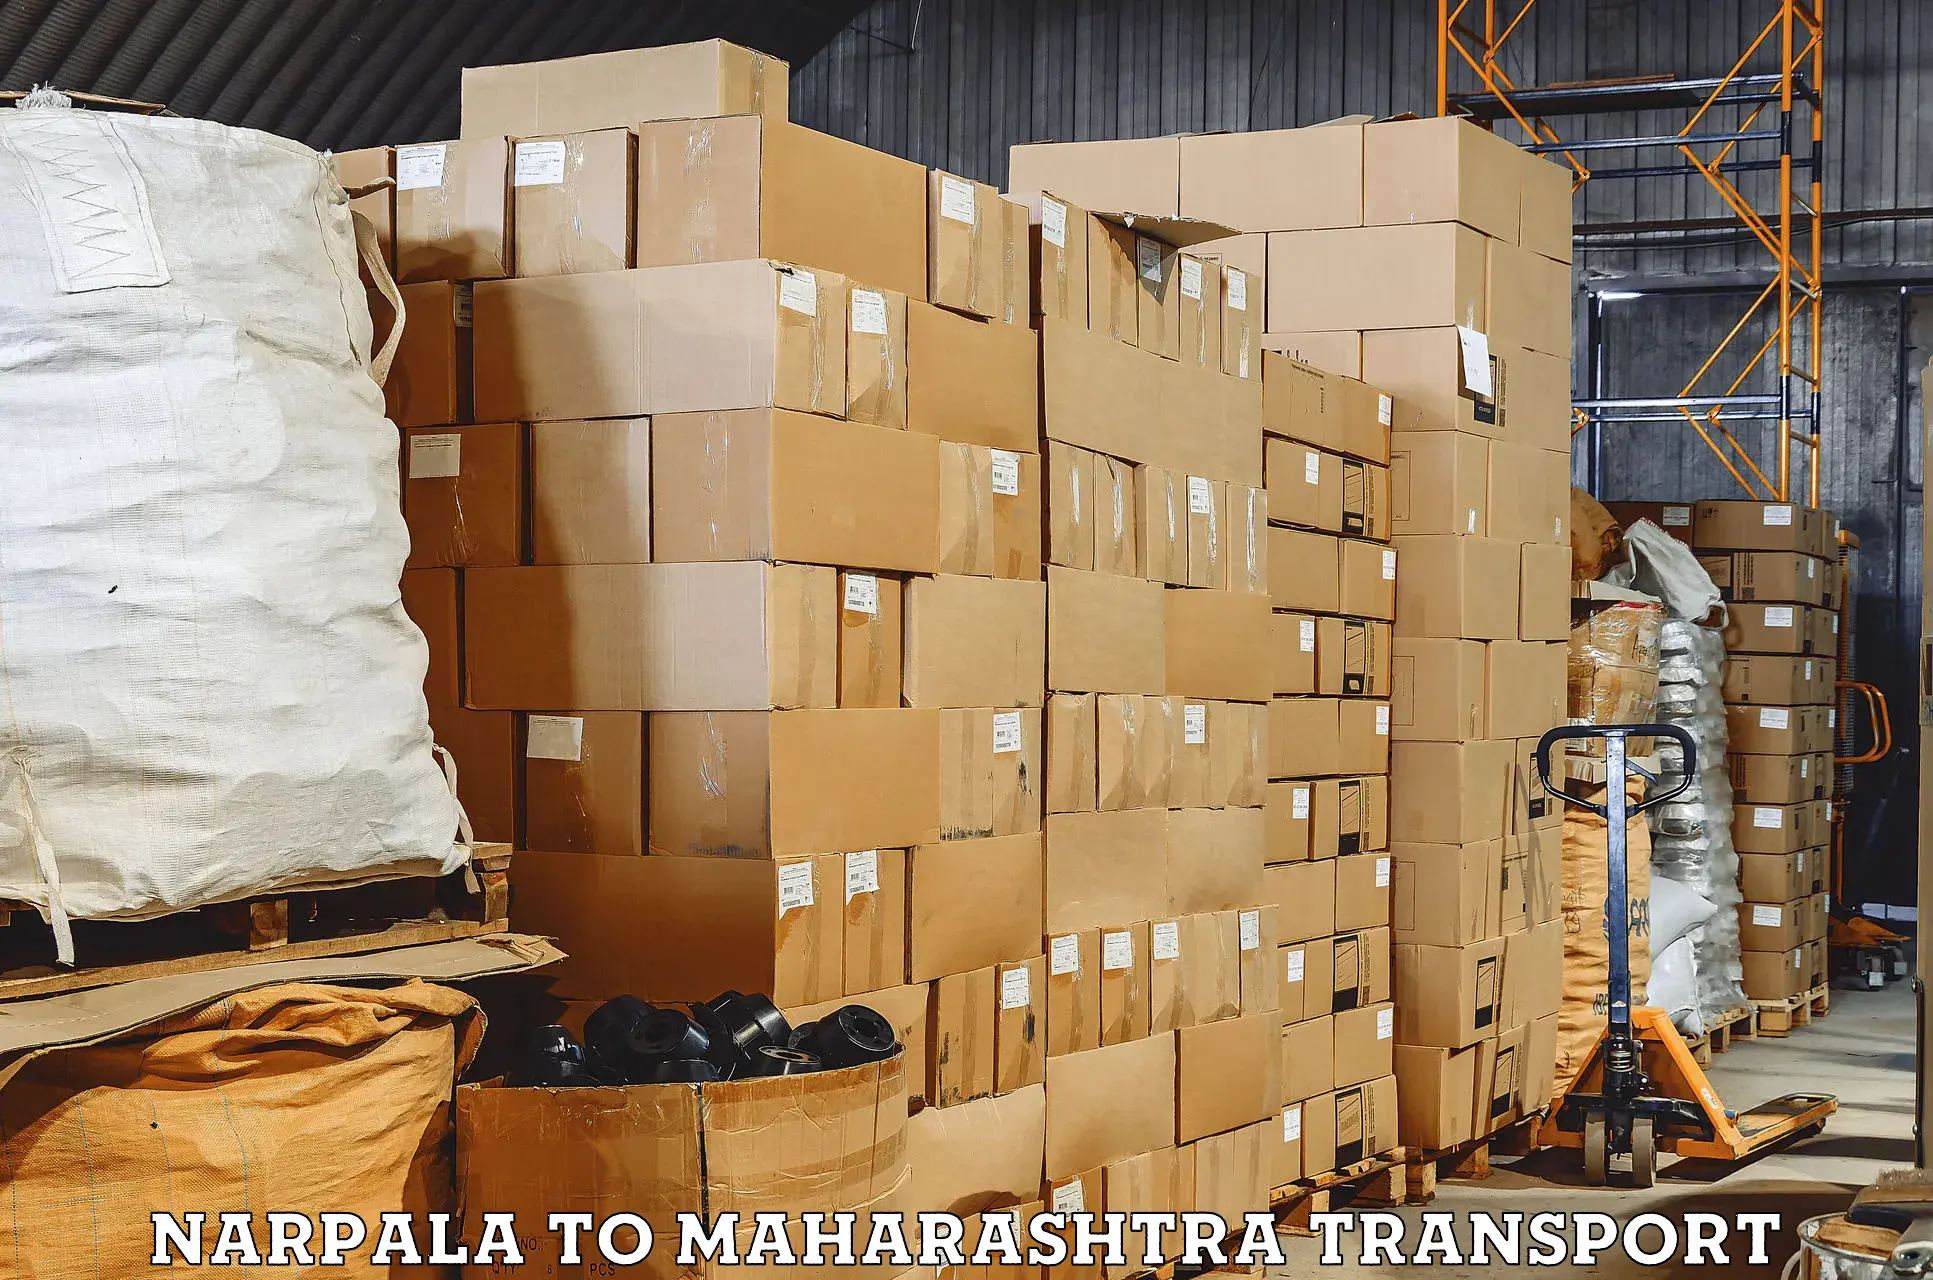 Transport bike from one state to another Narpala to Maharashtra